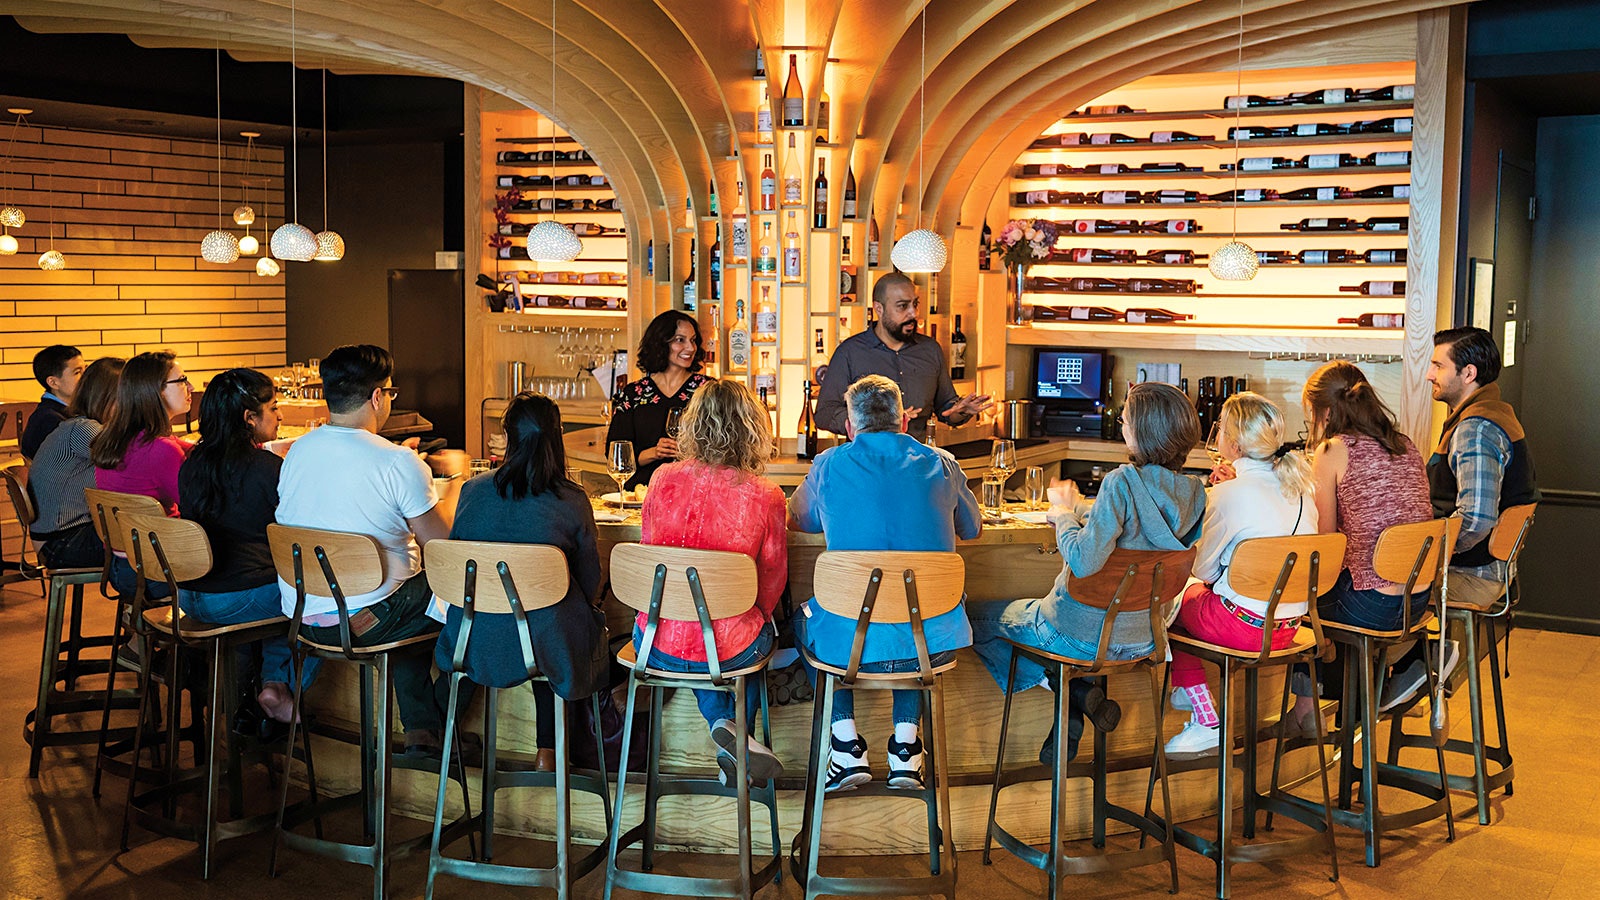  Swati Bose and Kabir Amir leading a tasting for guests at Flight Wine Bar at a wood bar with wood chairs in a room with other wood elements and wine bottles on wood shelves